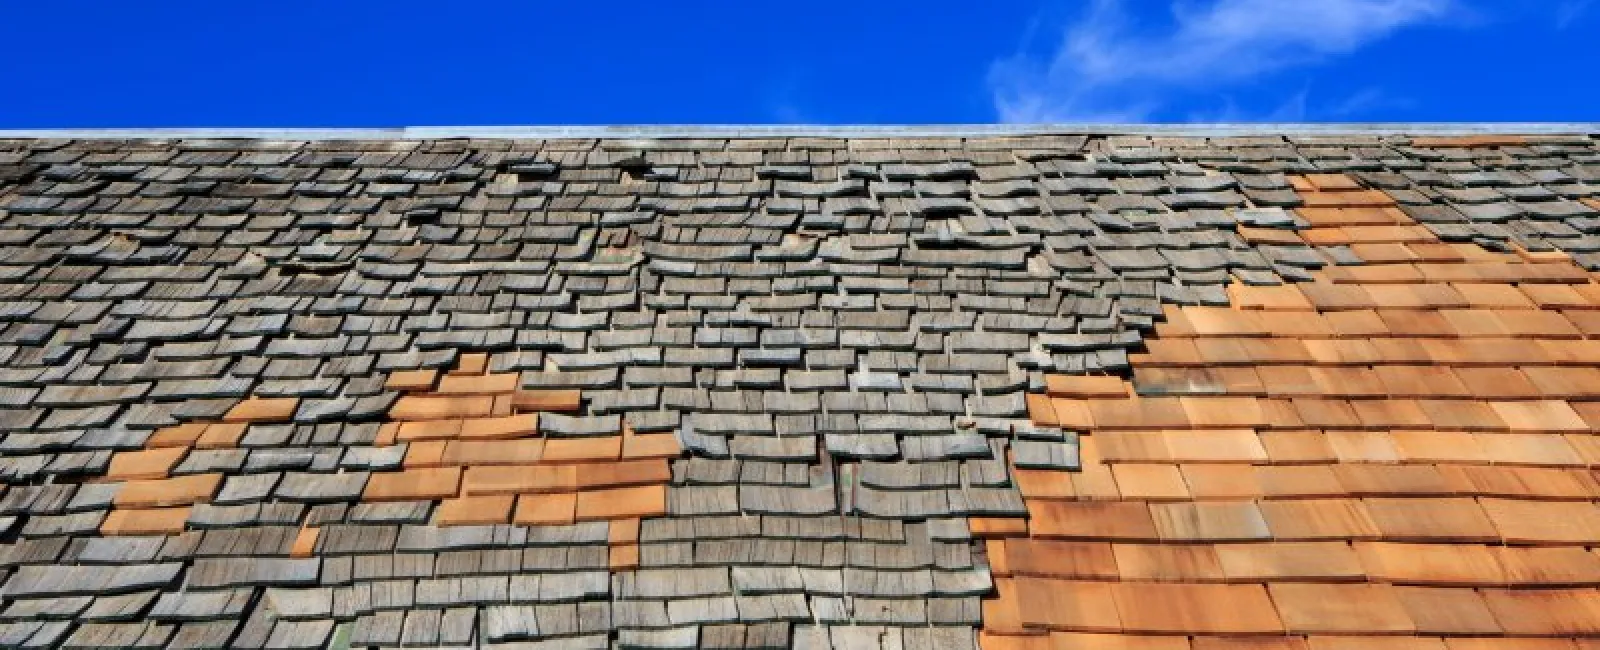 5 Common Shingle Roofing Repairs You Should Be Aware Of